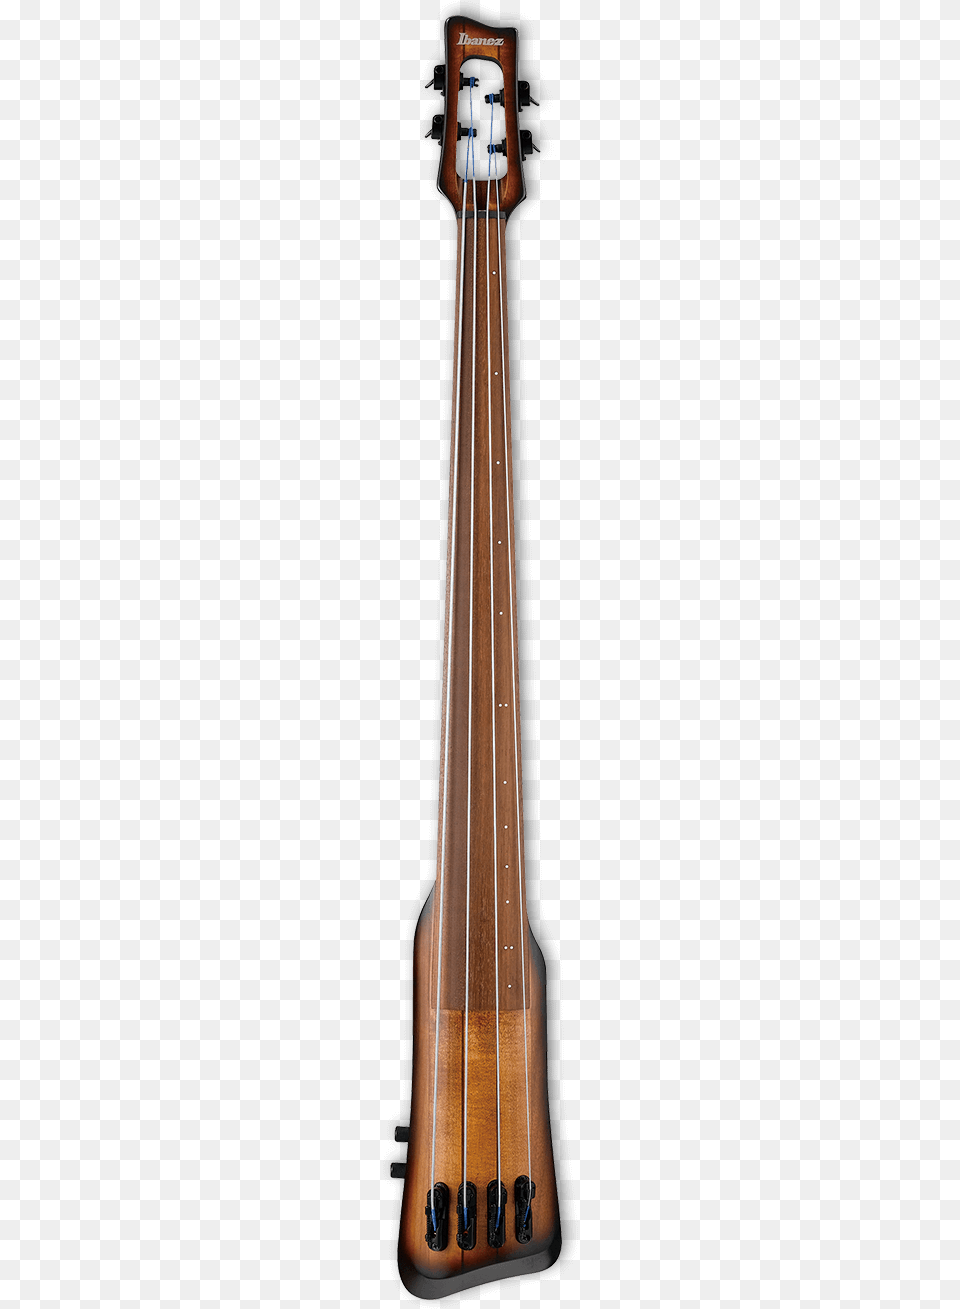 Ibanez Electric Upright Bass Contrabajo Electrico, Musical Instrument, Bass Guitar, Guitar, Violin Png